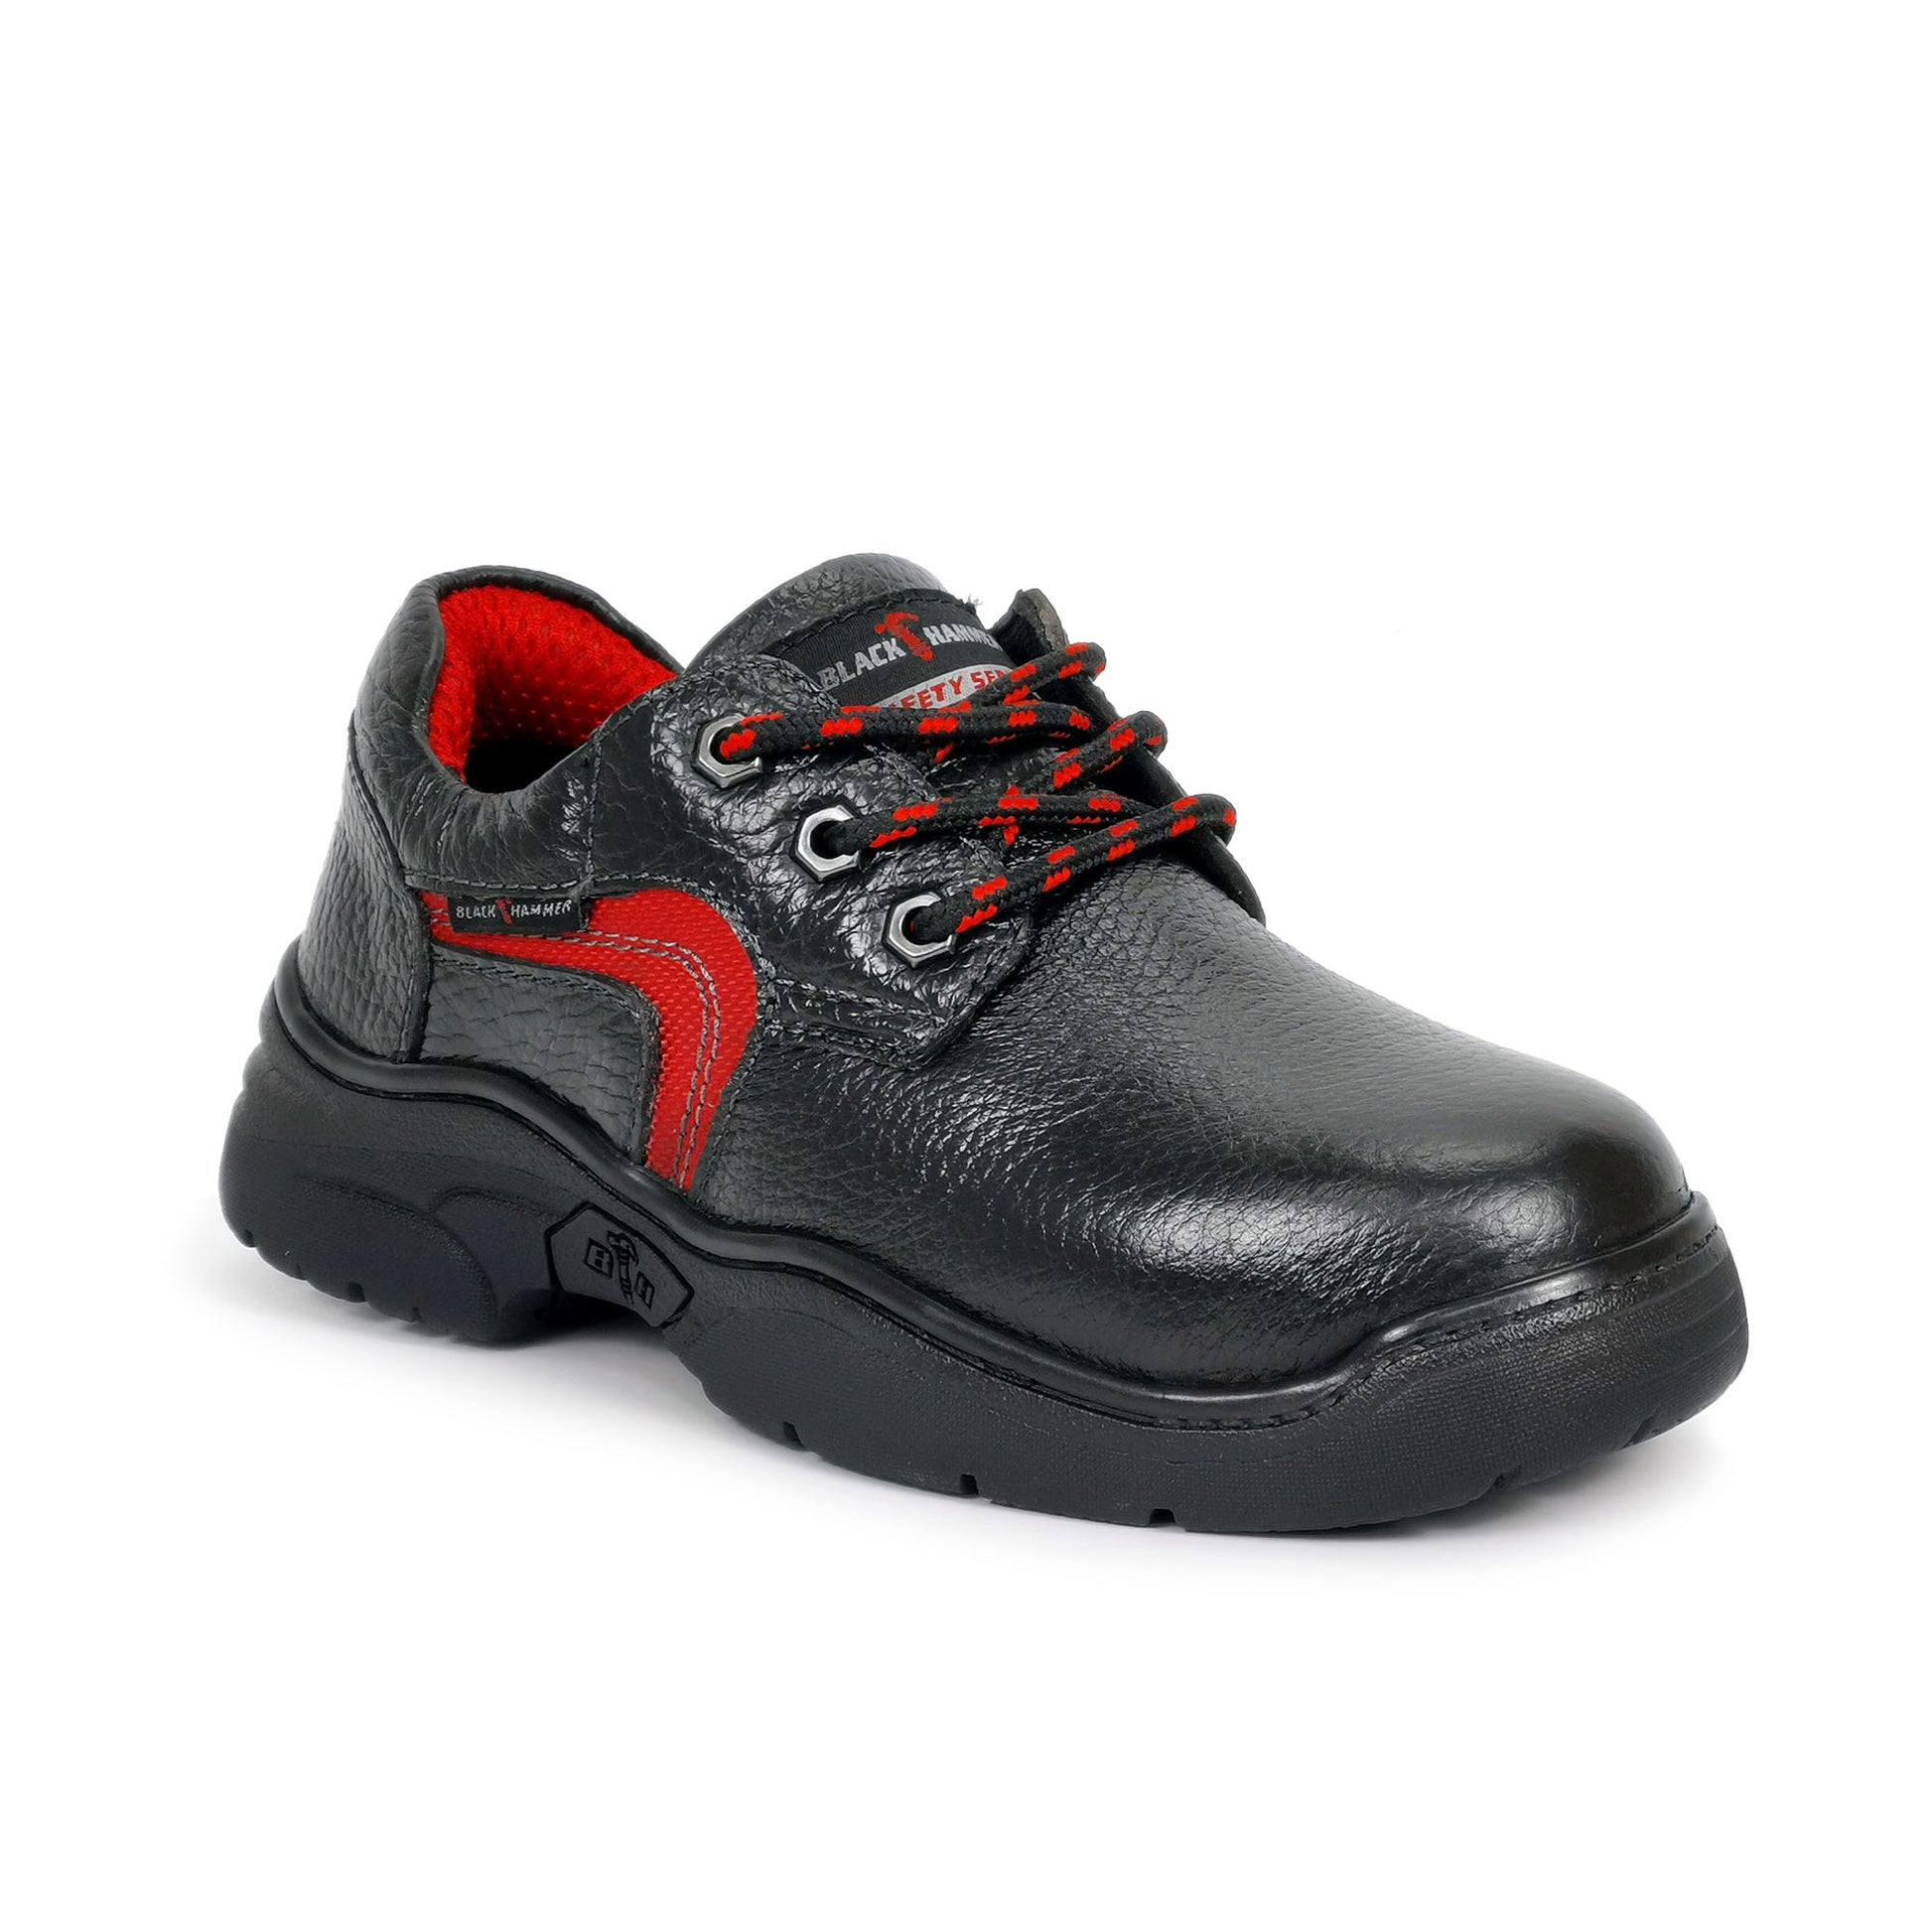 Black Hammer Low-cut Lace Up Ladies Safety Shoes BH 3881